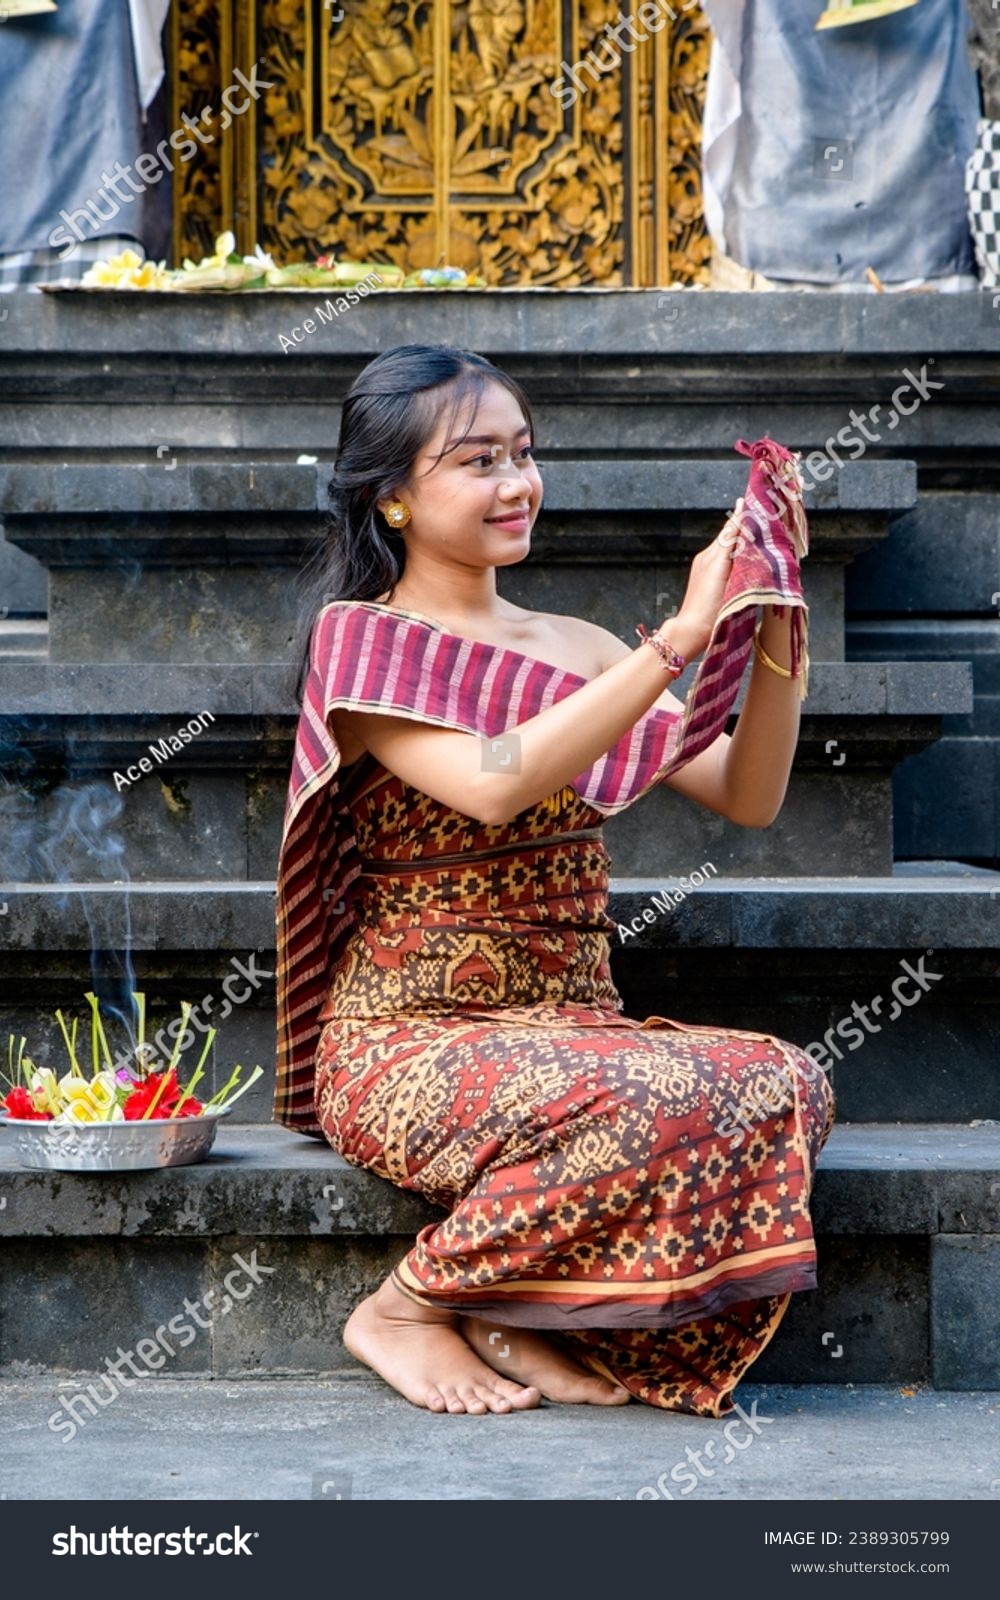 Woman in traditional clothing making an offering at a temple #2389305799